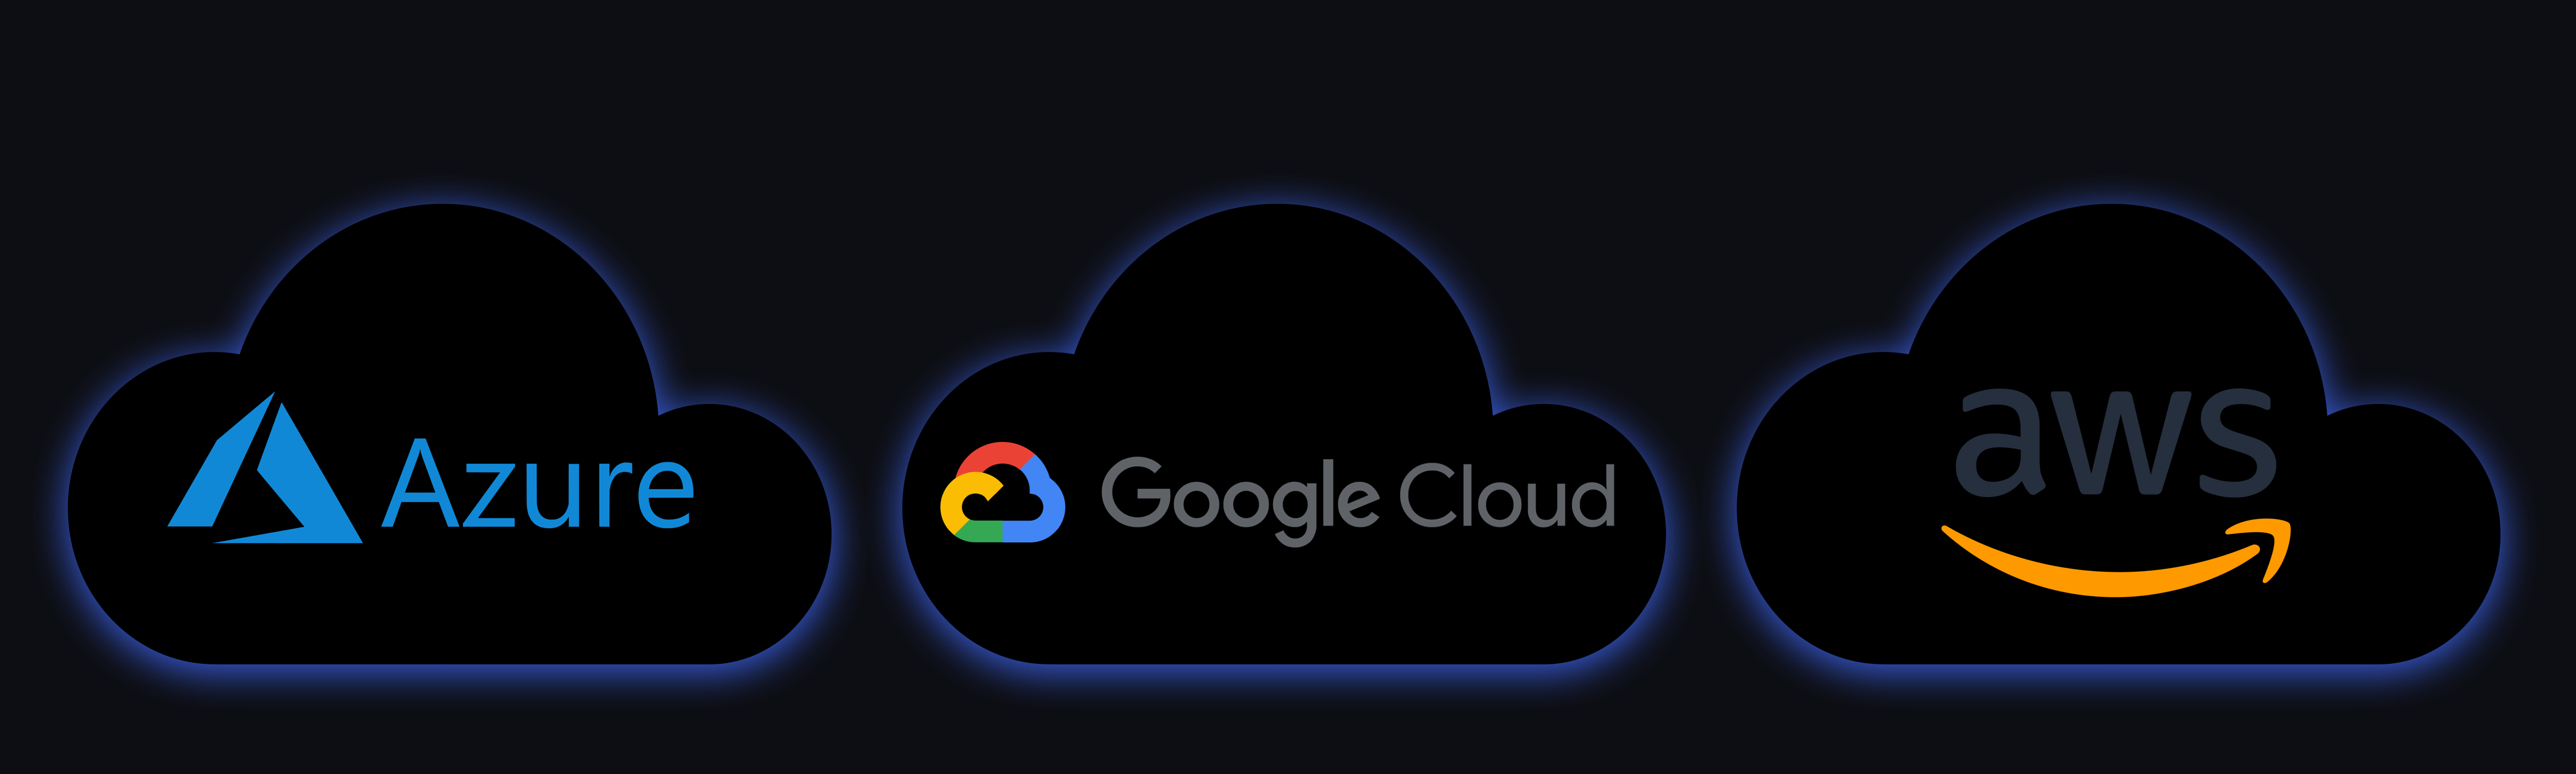 Three clouds representing several cloud providers includign Azure, Google Cloud, and AWS.